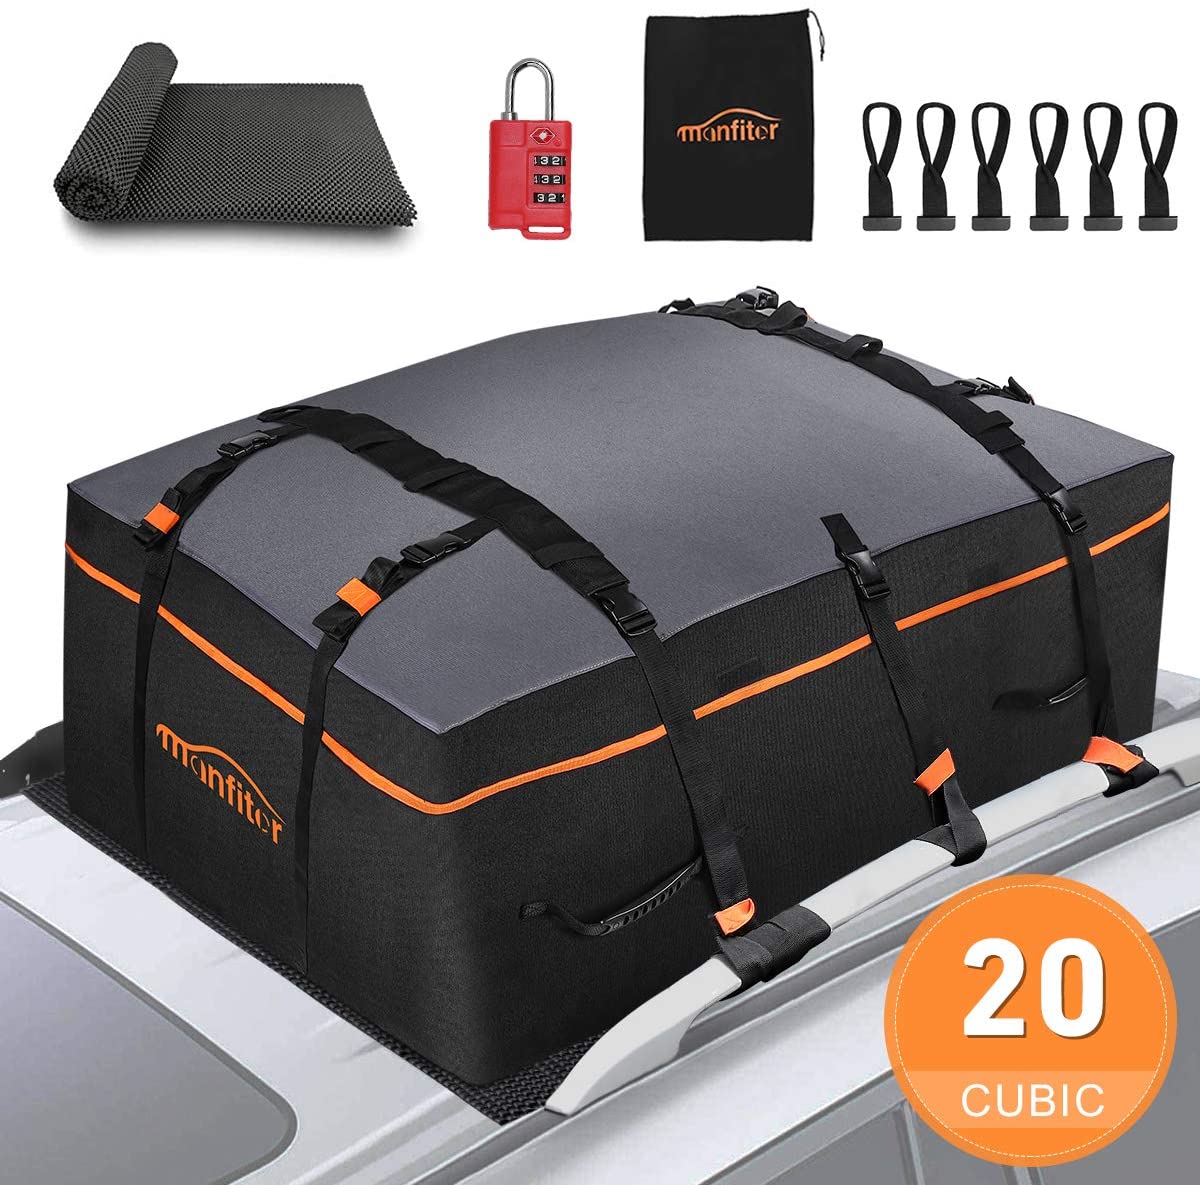 Rooftop Cargo Carrier Car Top Carrier, 20 Cubic Feet 100% Waterproof Car Roof Bag, Roof Rack Cargo Carrier with Anti-Slip Mat + 10 Reinforced Straps Fits All Vehicle with/Without Rack